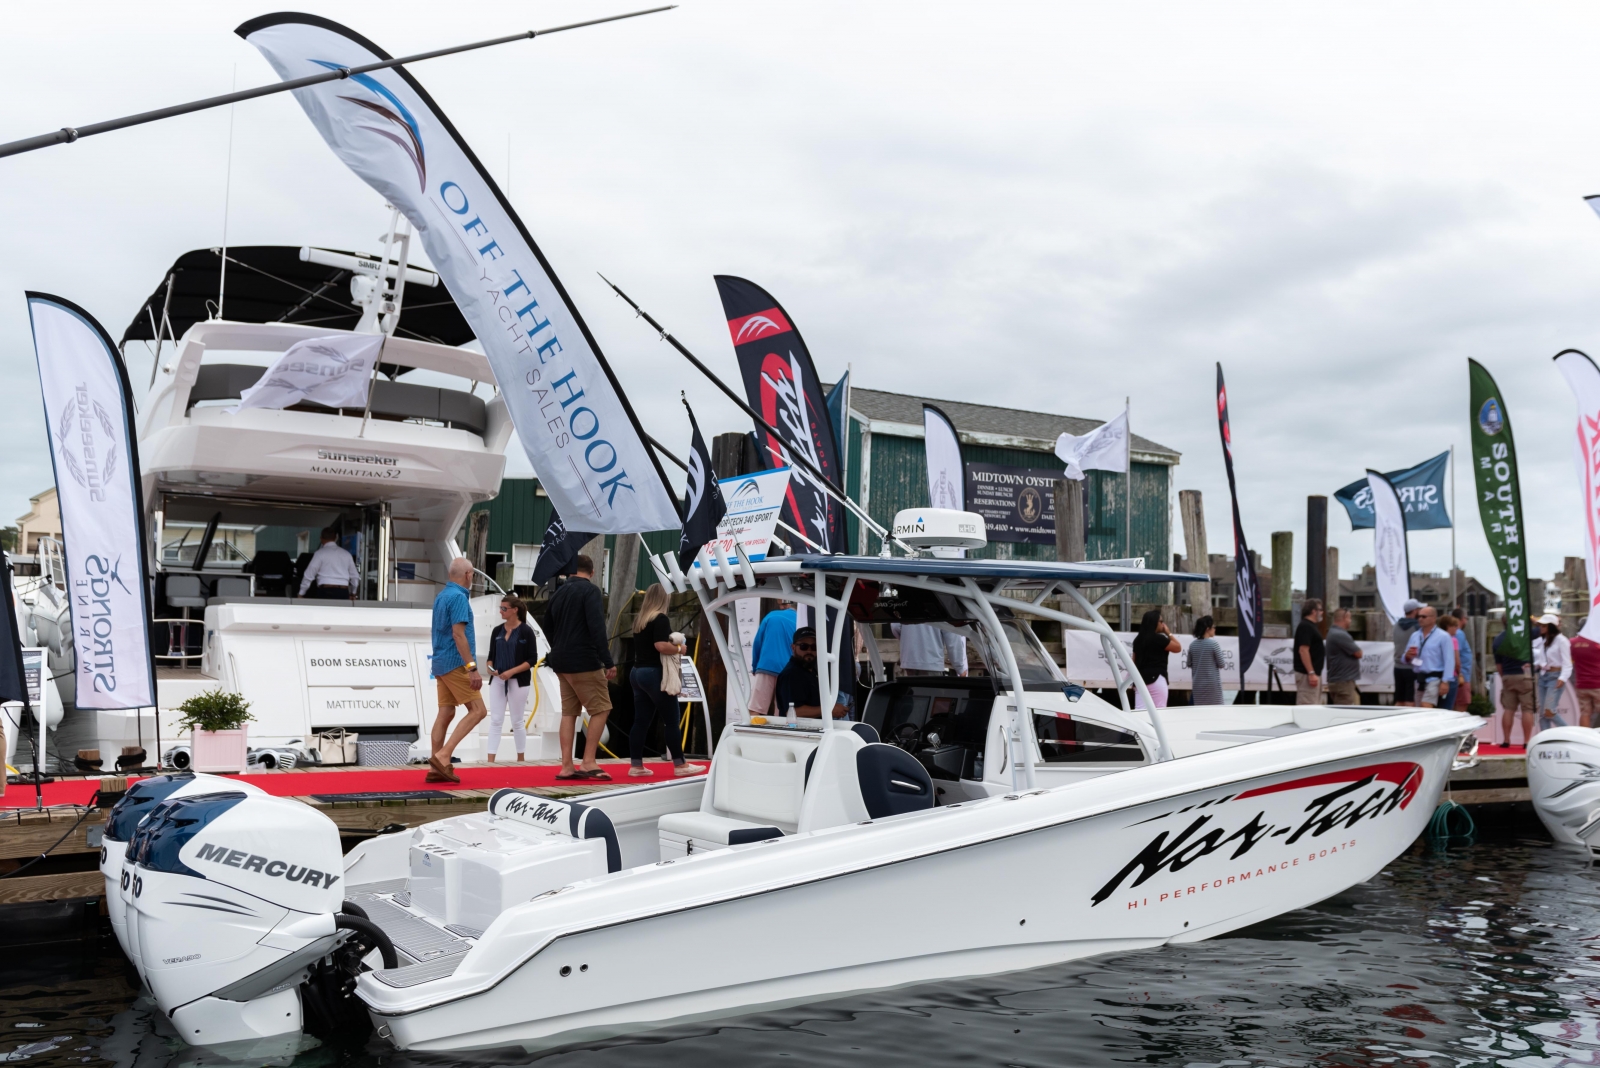 2019 NOR-TECH 340 SPORT, Off the Hook Yacht Sales at the Newport Boat Show 2019